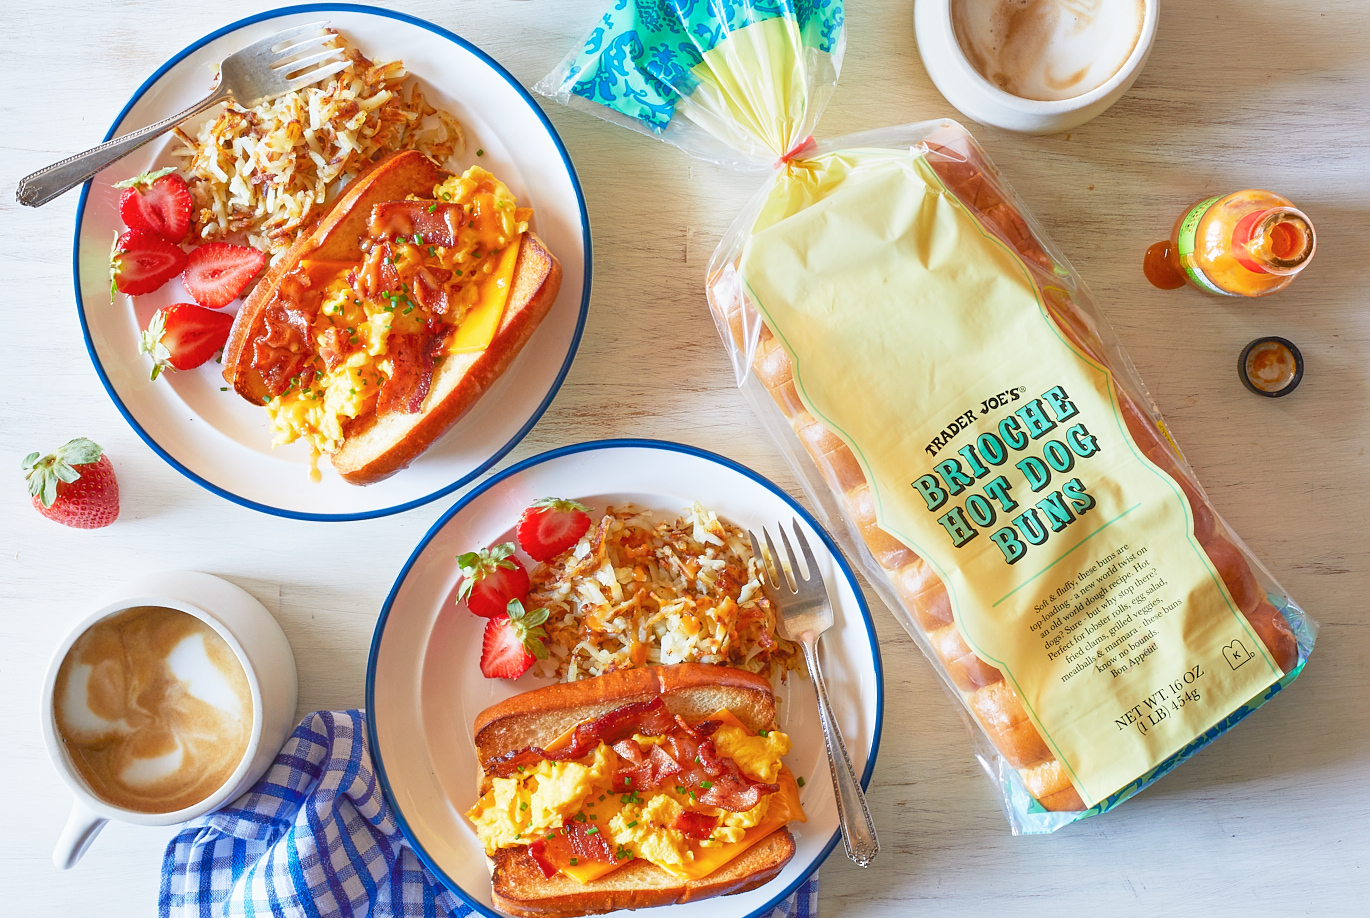 Trader Joe's Brioche Hot Dog Buns; shown as a 'Breakfast Bun', with scrambled eggs, bacon, cheese in a toasted brioche hot dog bun. On two plates with hashbrowns and sliced strawberries